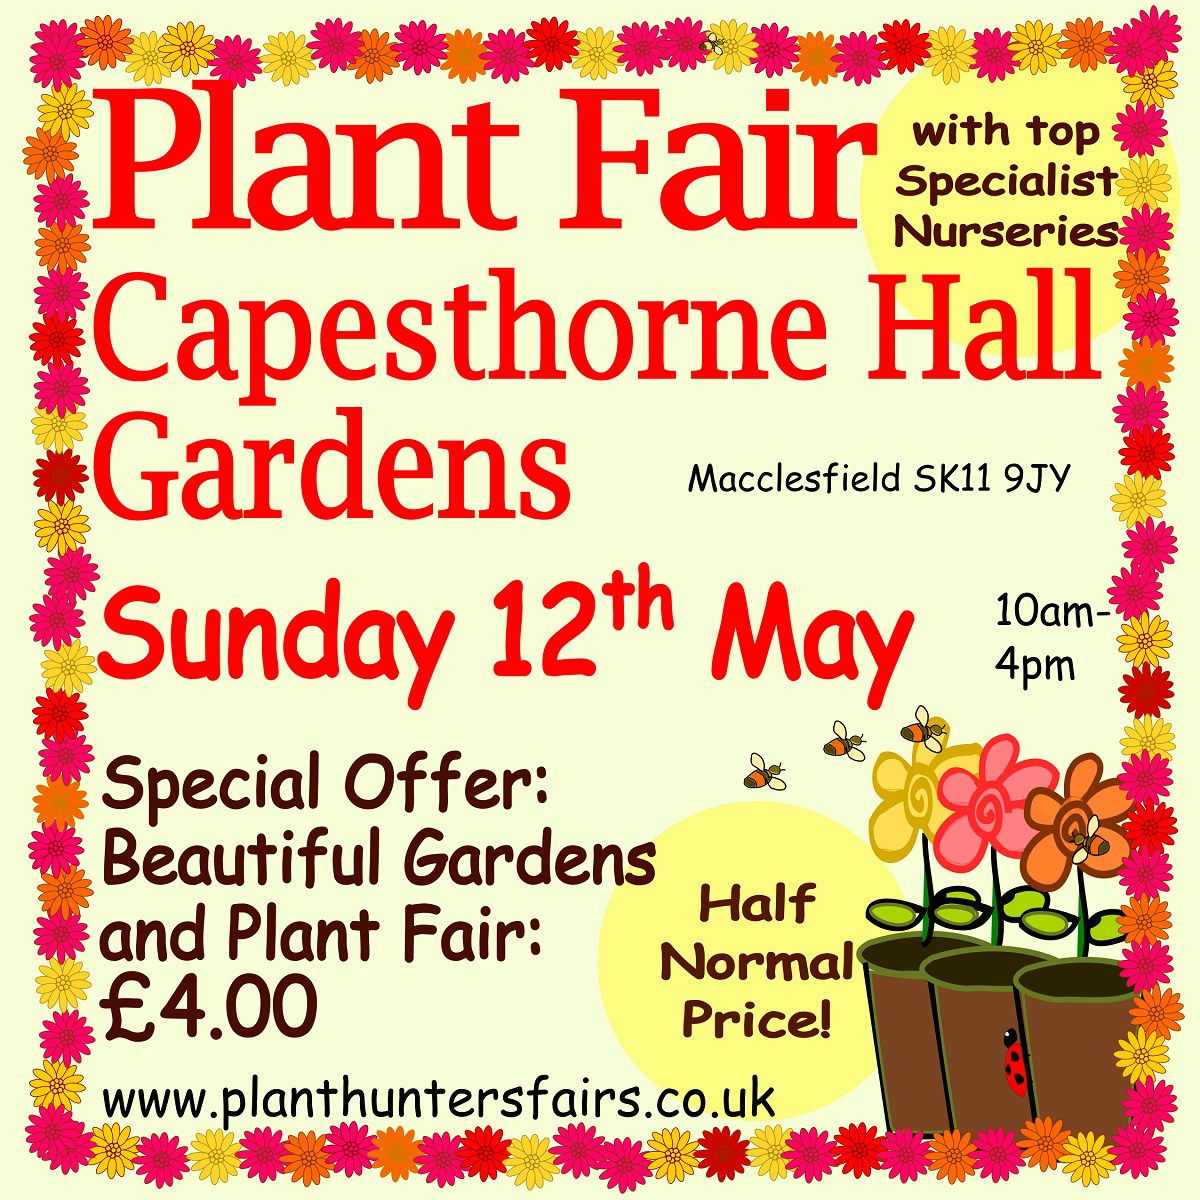 Join me this Sunday at Capesthorne Hall 12th May for a delightful day out! Explore my collection of nature inspired watercolour art prints, scarves, jewellery and greeting cards. Don't miss out on this chance to discover unique treasures! @Plantfairs